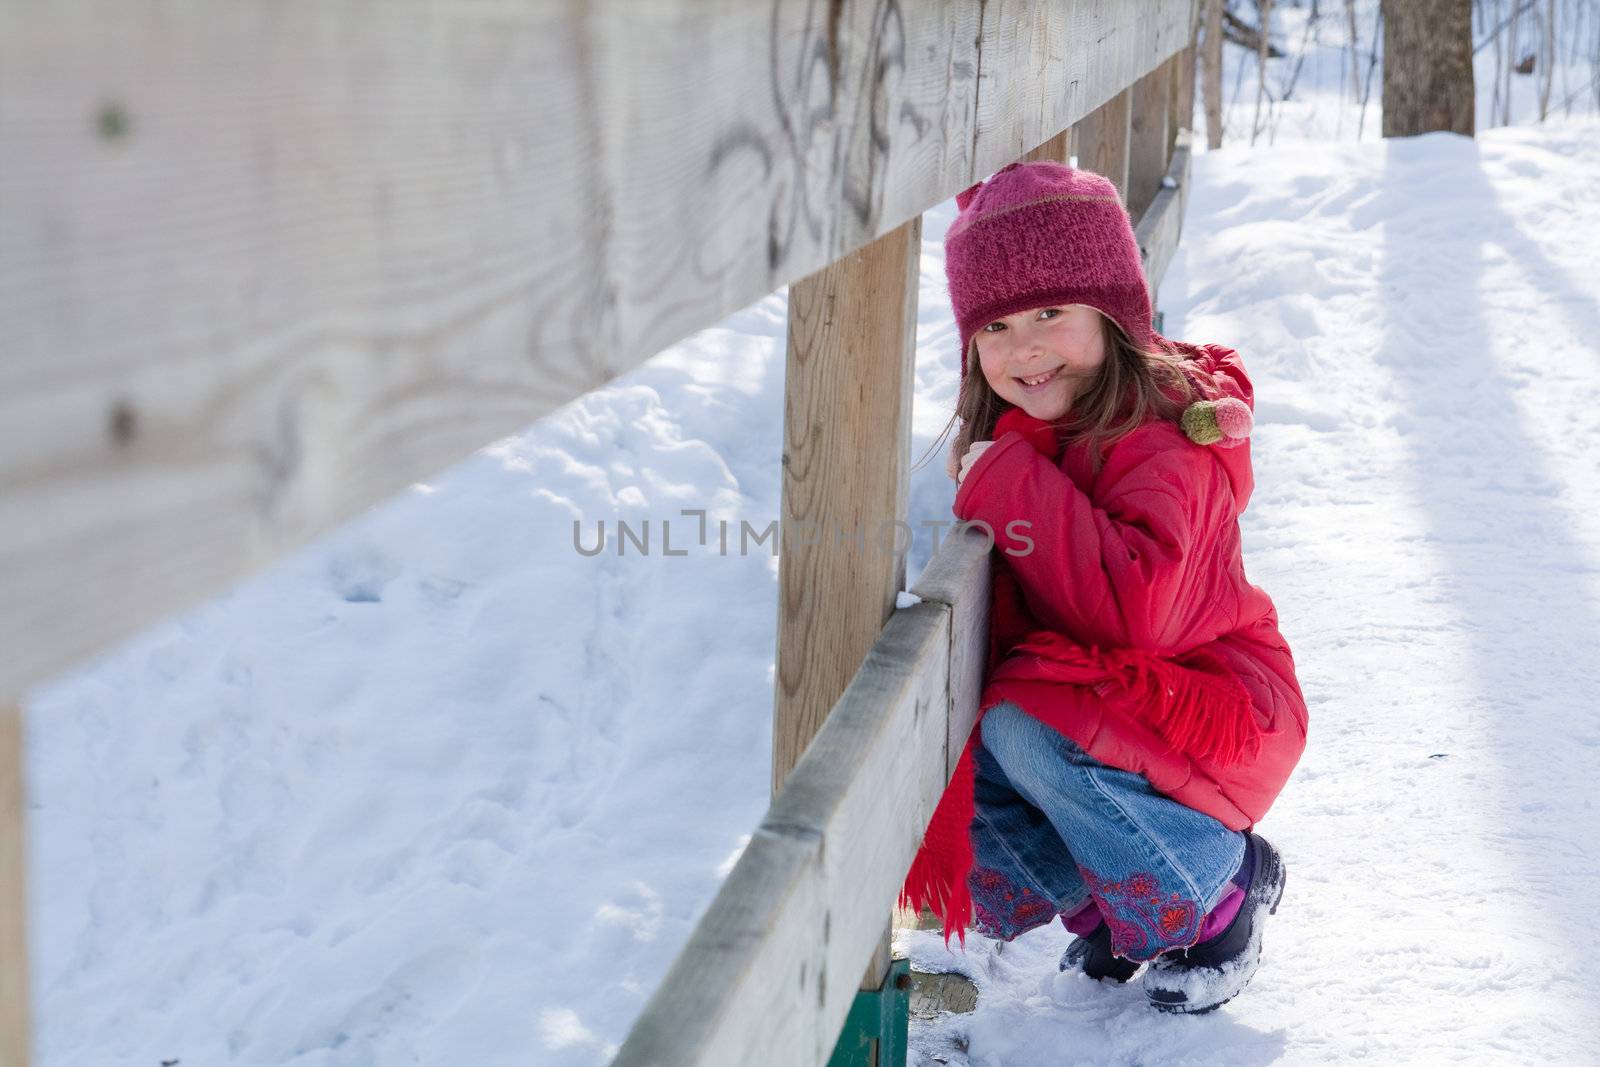 Little winter girl by Talanis